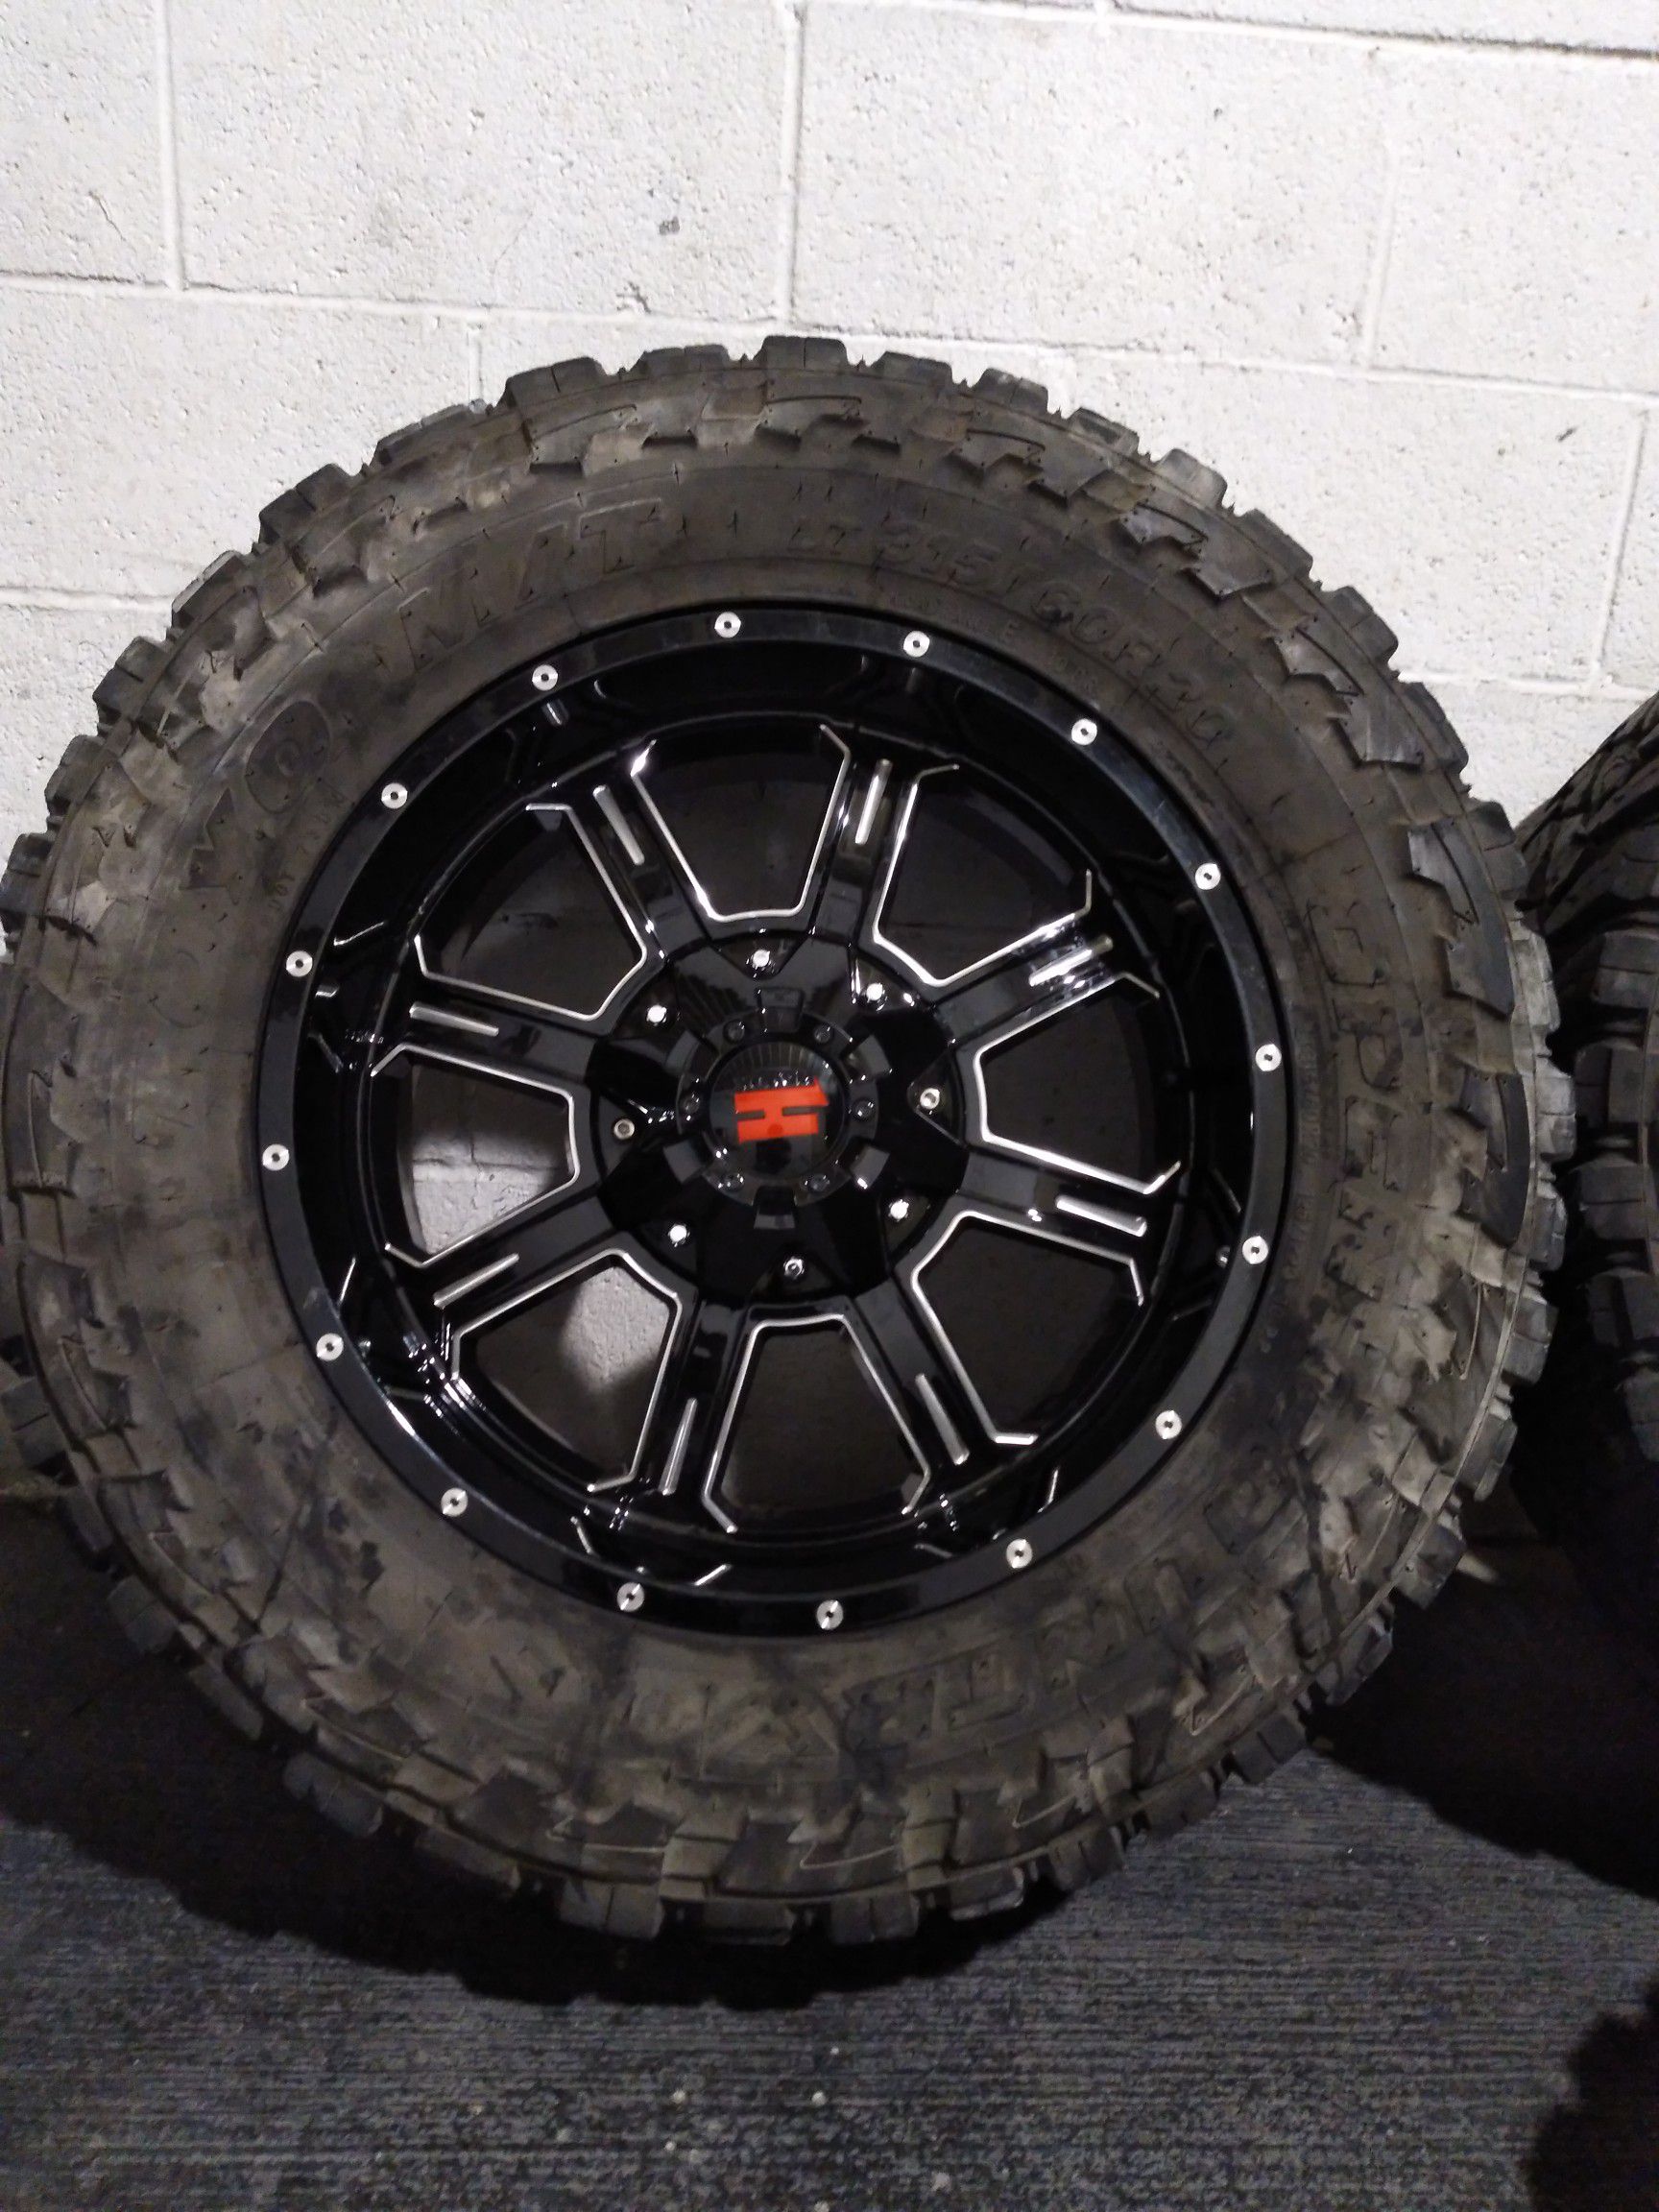 New 20 off road rims with Toyo open country tires